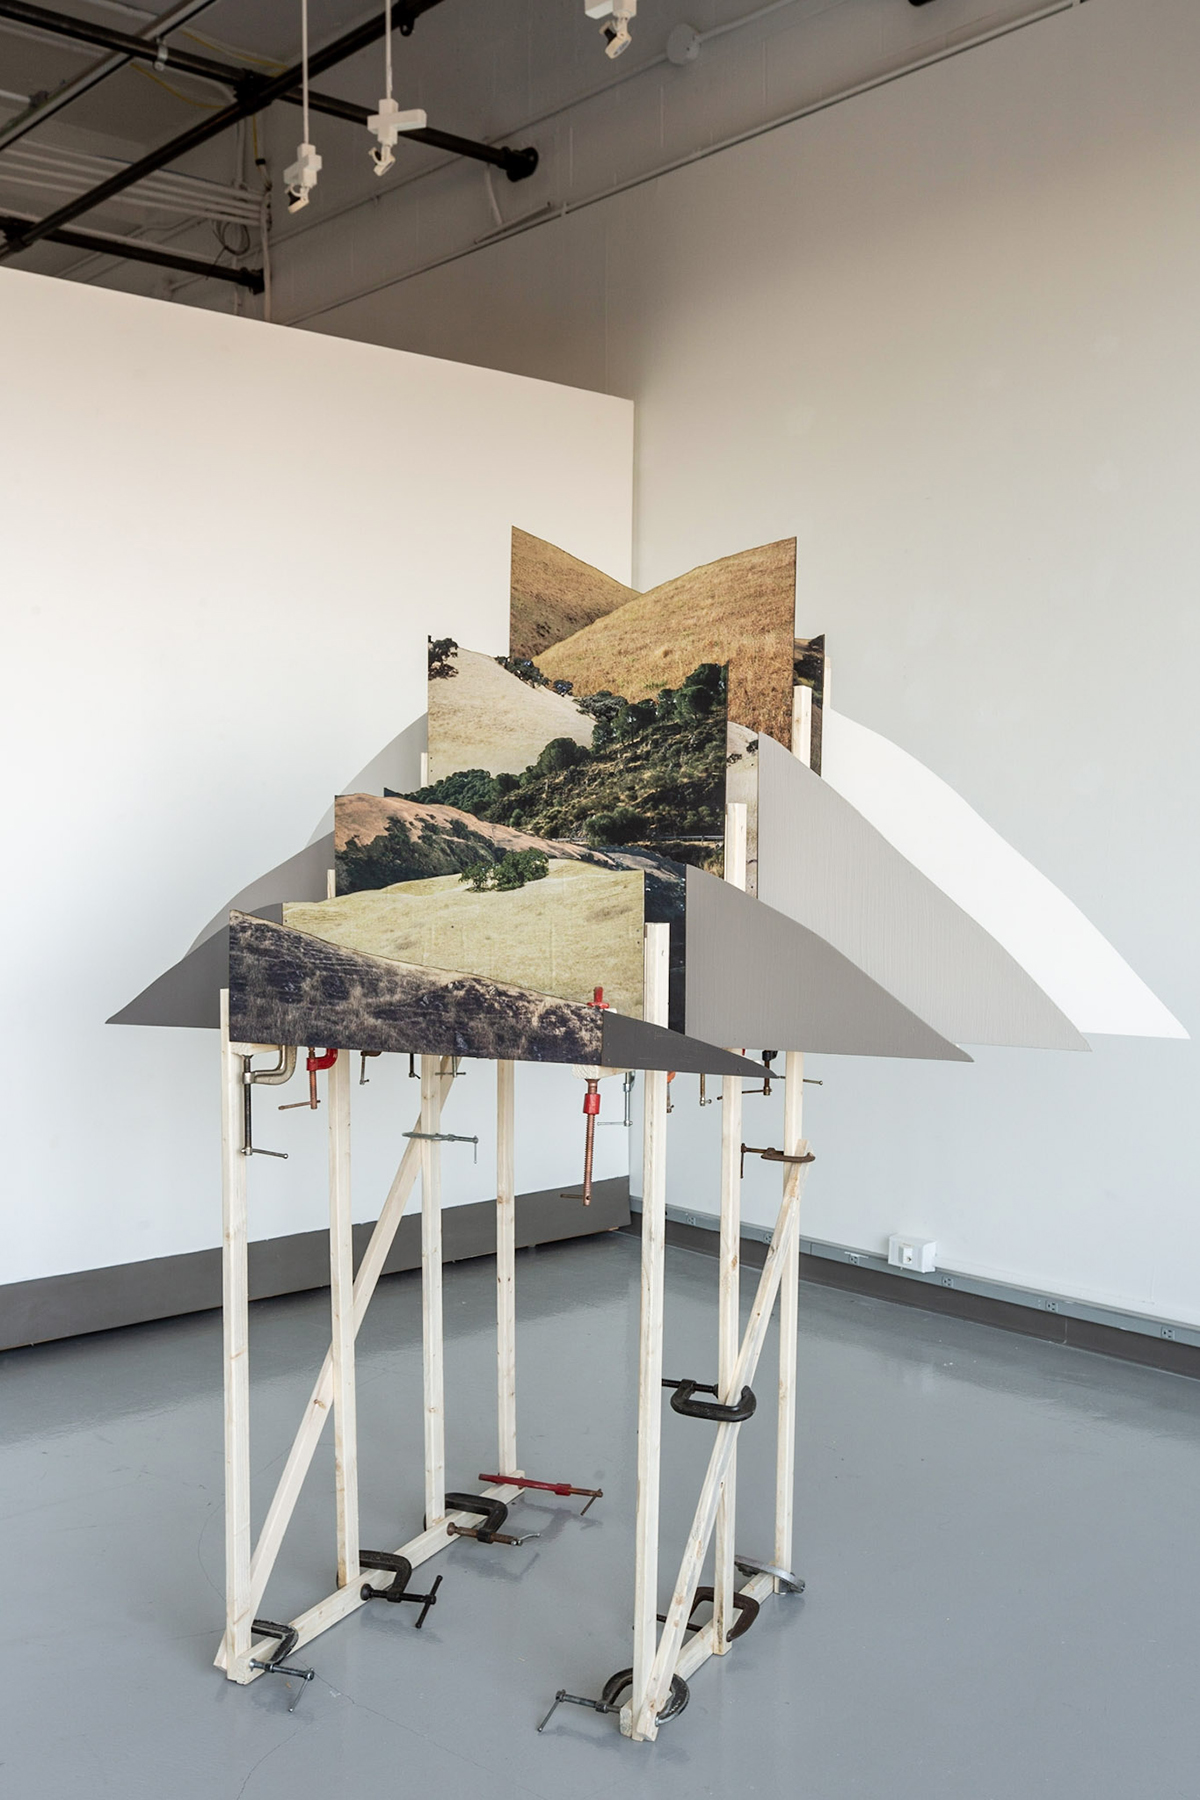 A series of photo prints sits on an intricate easel-type structure.